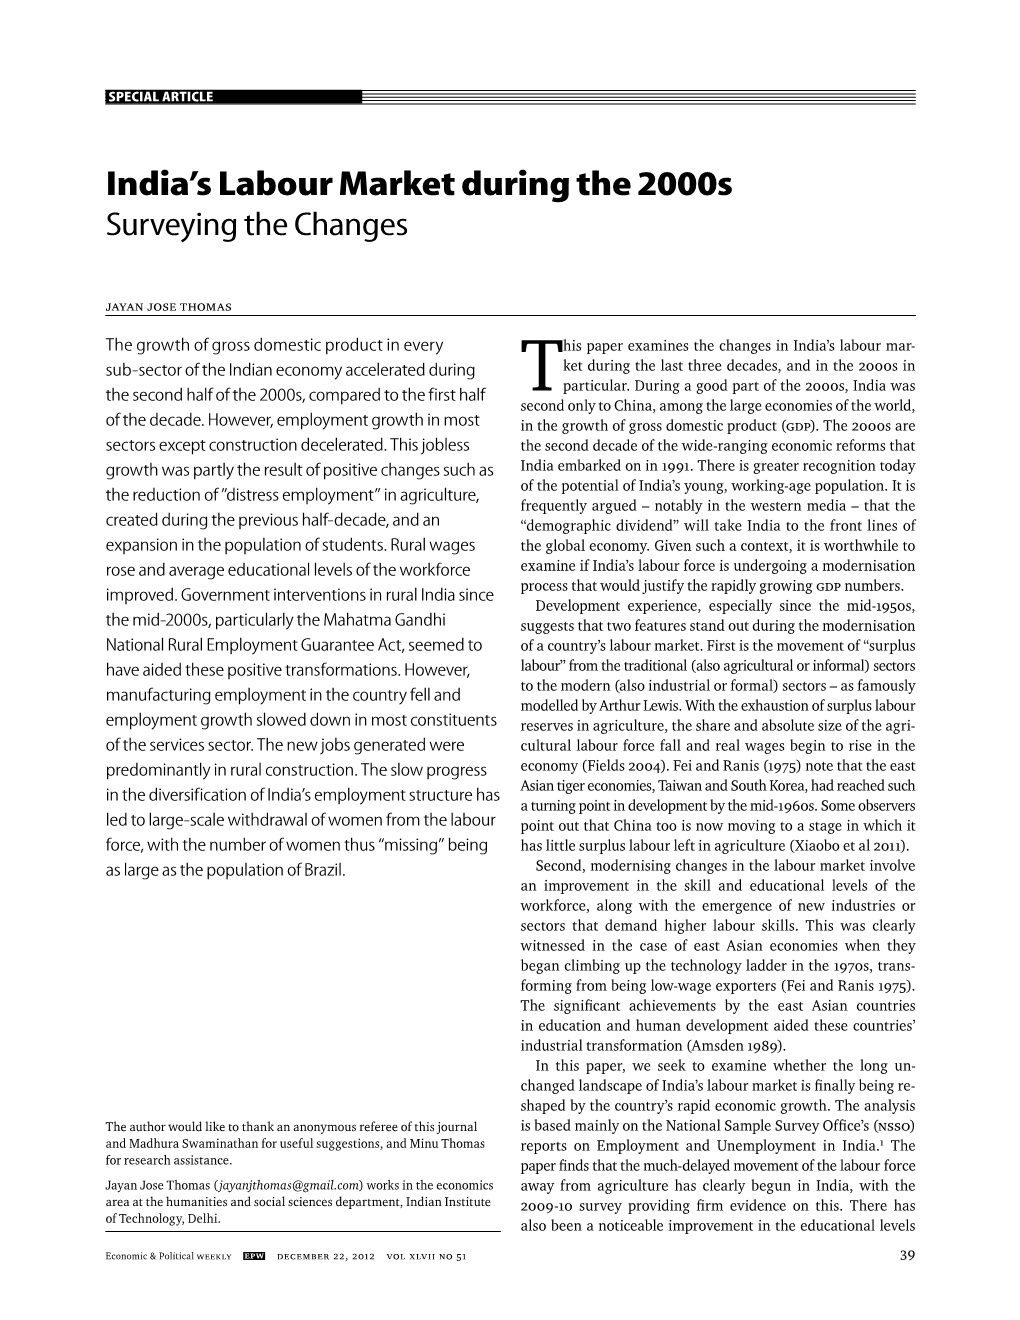 India's Labour Market During the 2000S